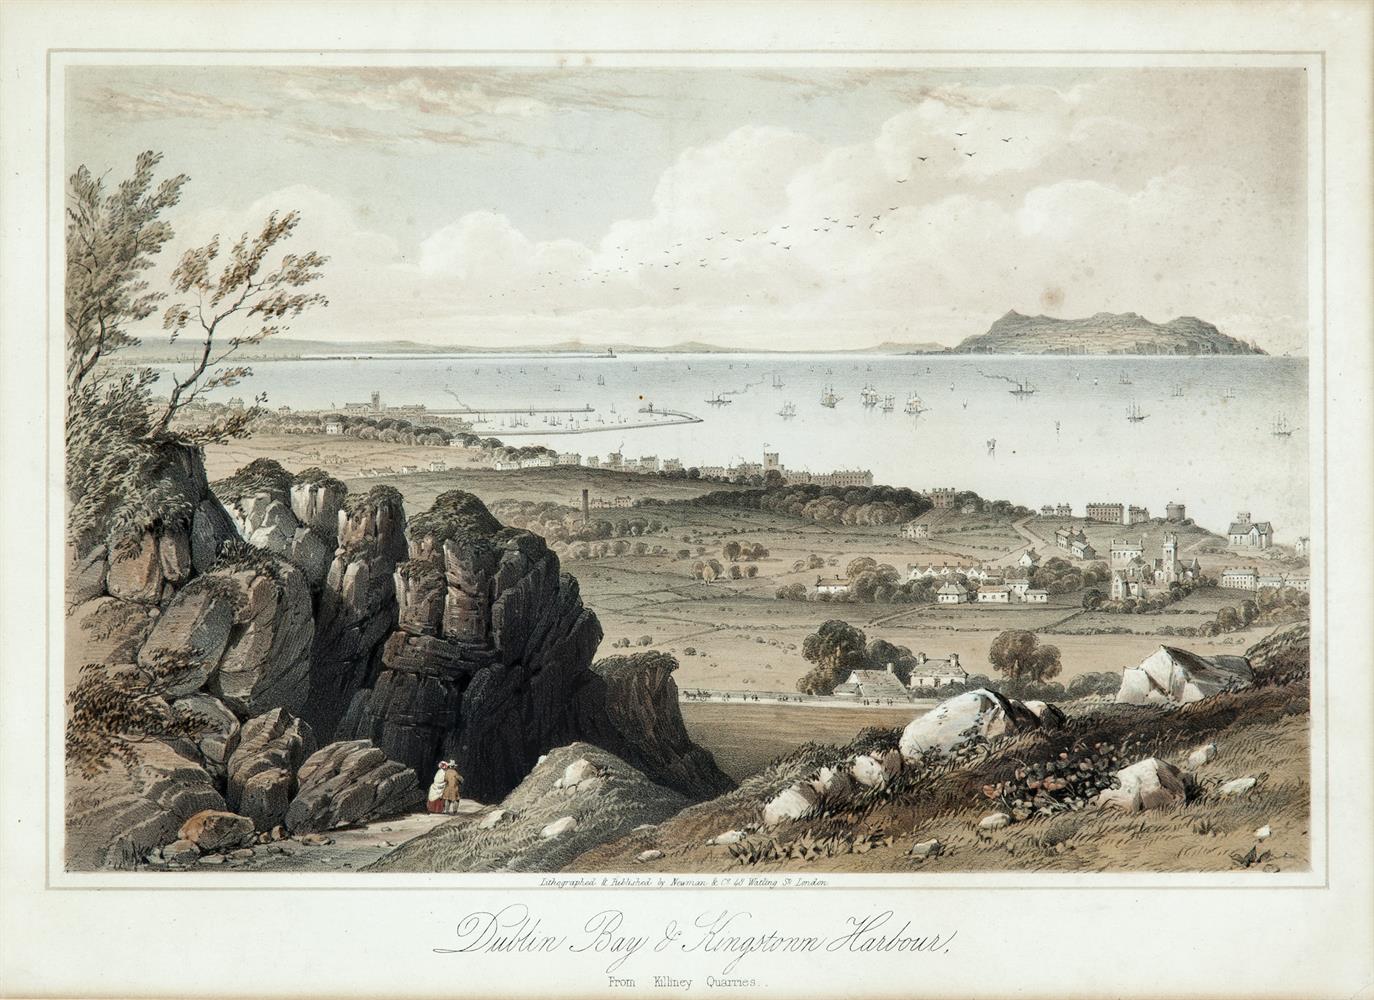 NEWMAN & CO., LONDONDublin Bay and Kingstown Harbour from Killiney QuarriesLithograph, 27 x